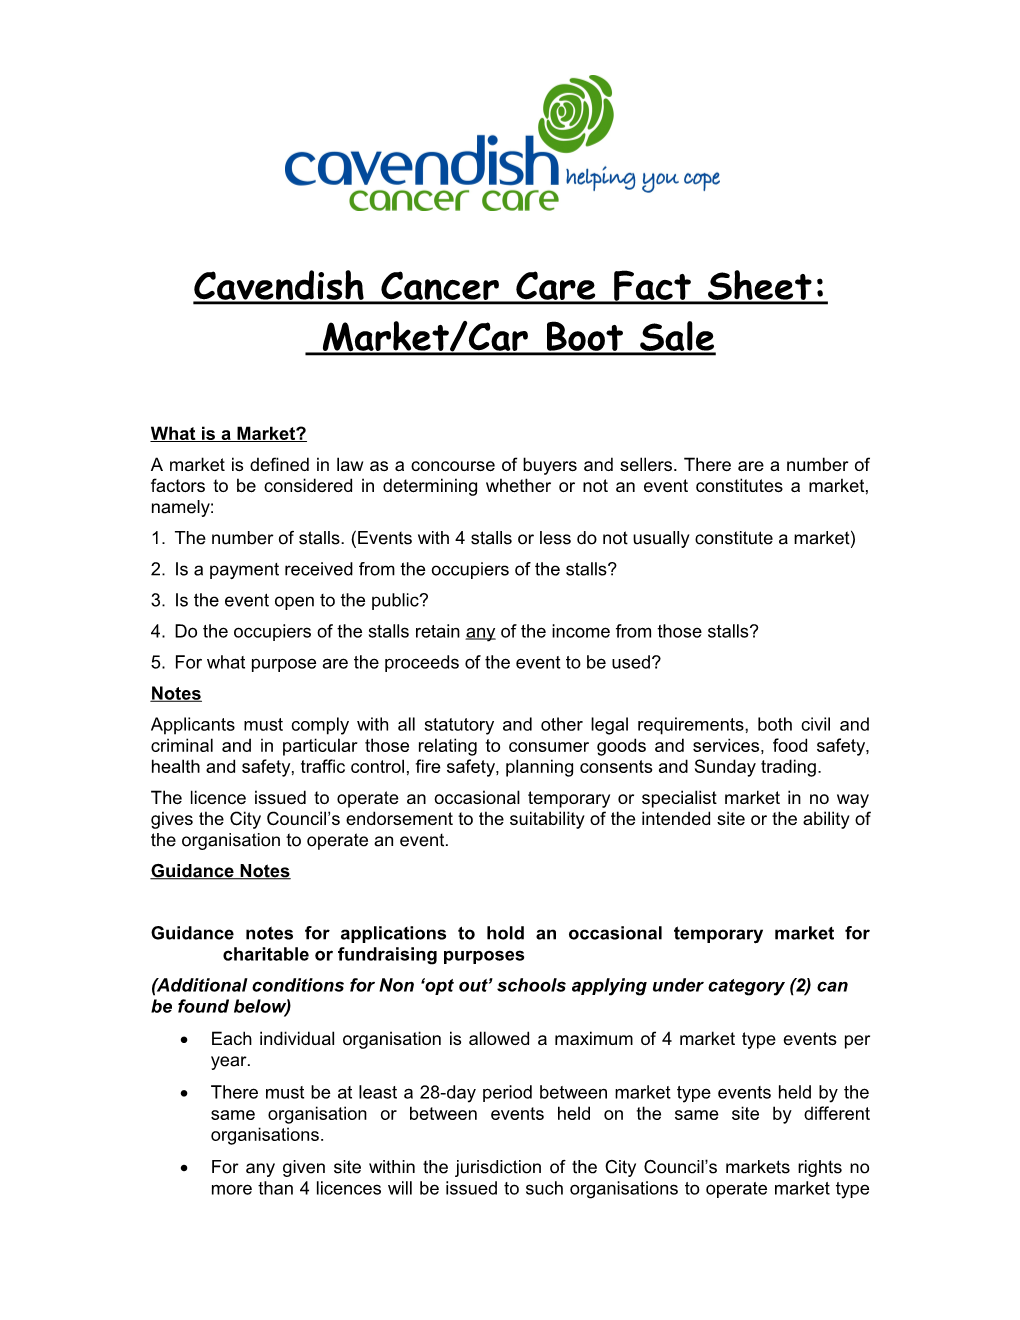 Cavendish Cancer Care Fact Sheet Car Boot Sale